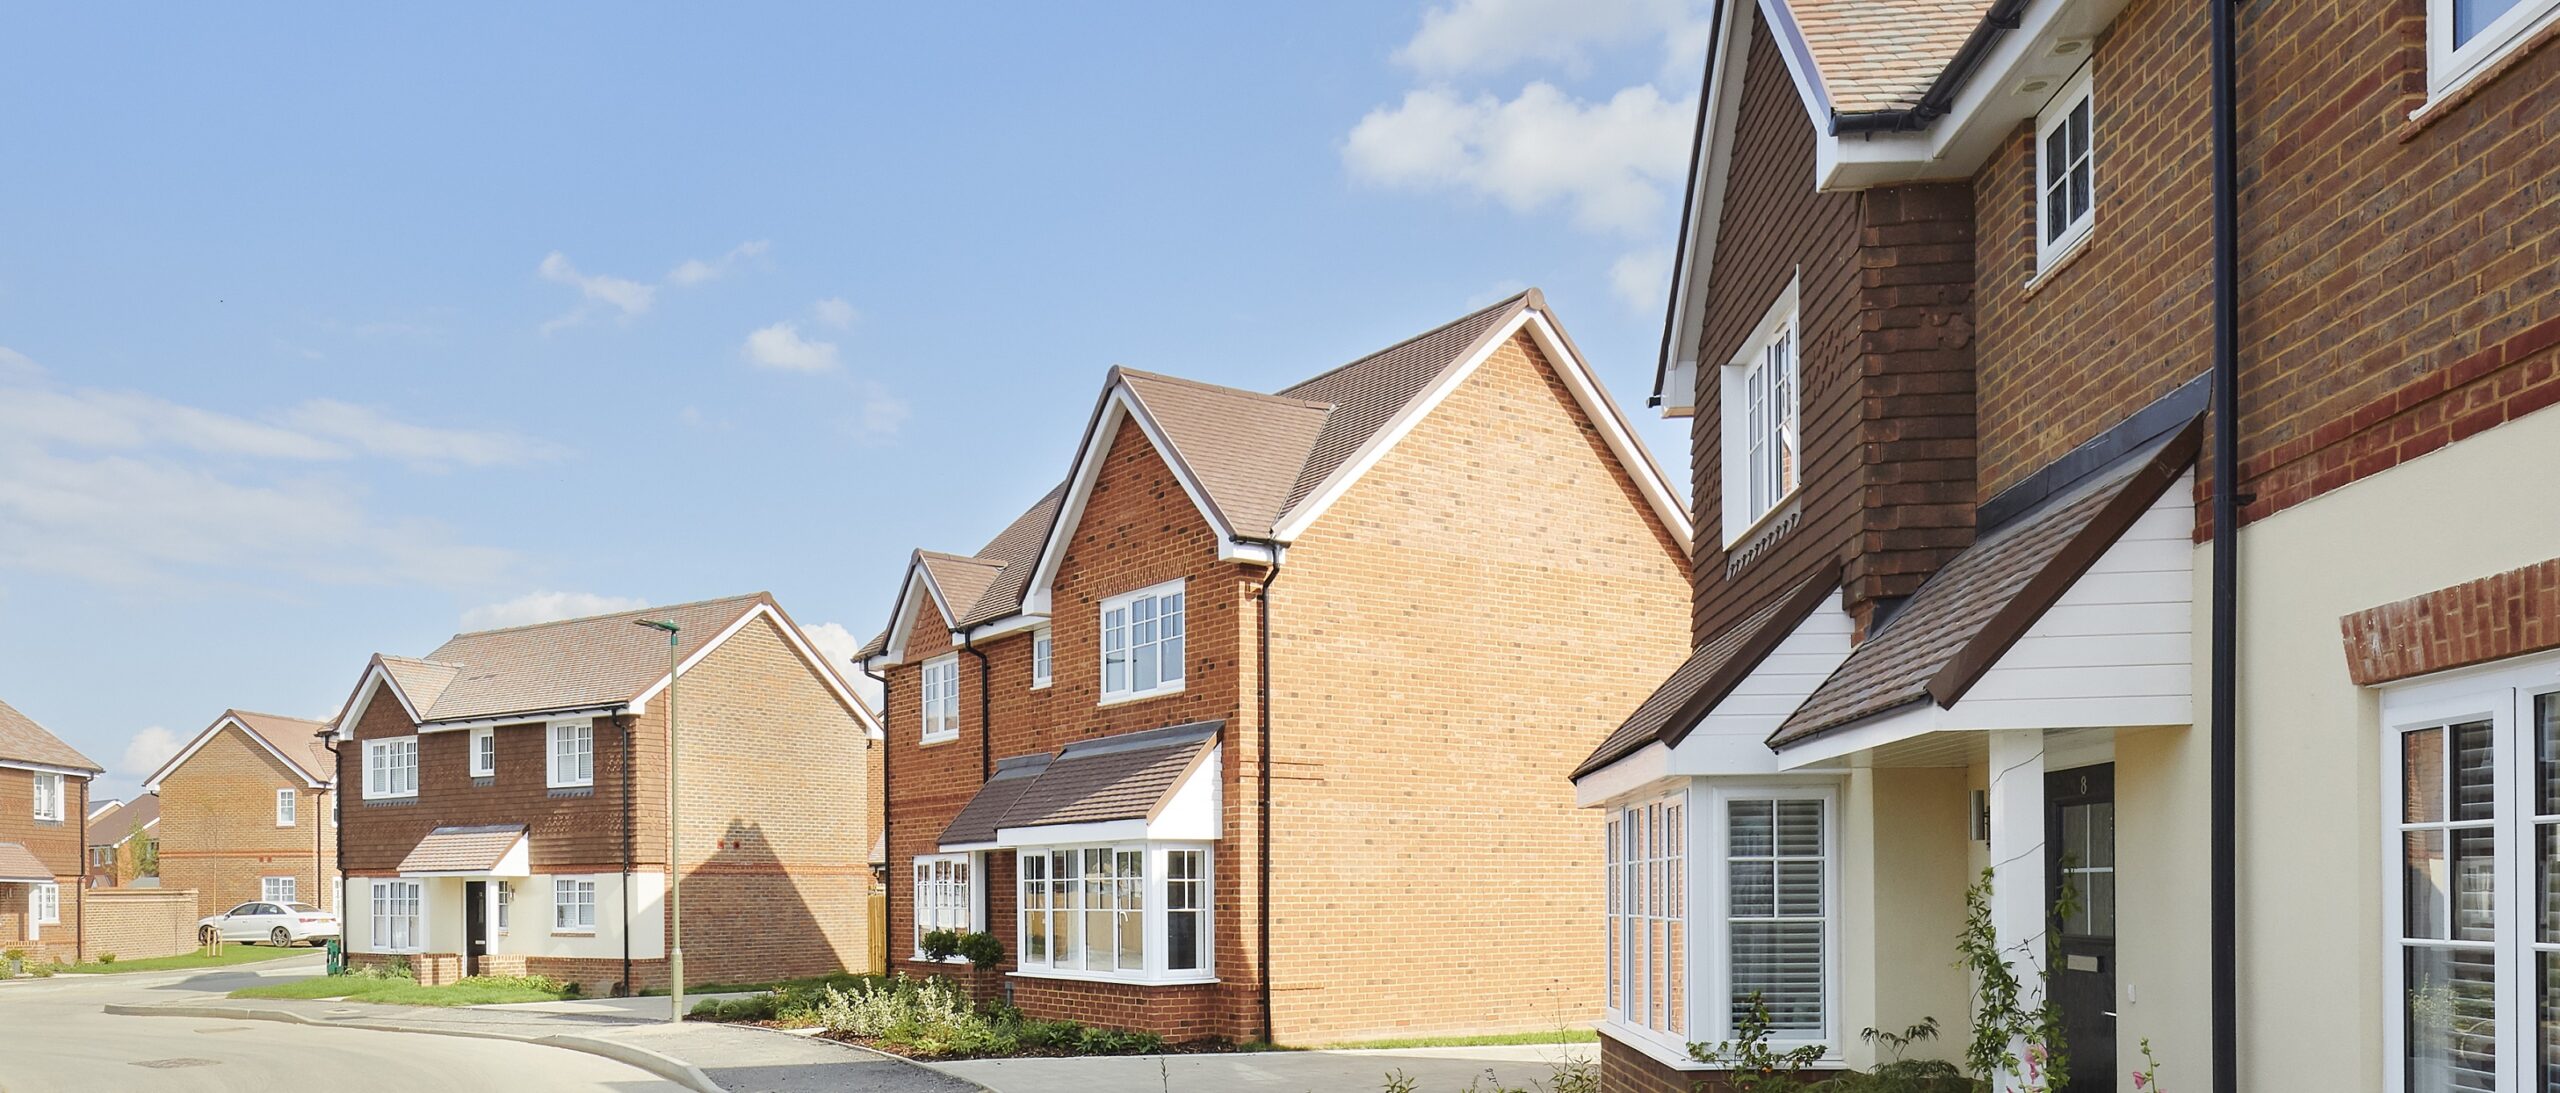 Completion in sight for Cranleigh new homes development